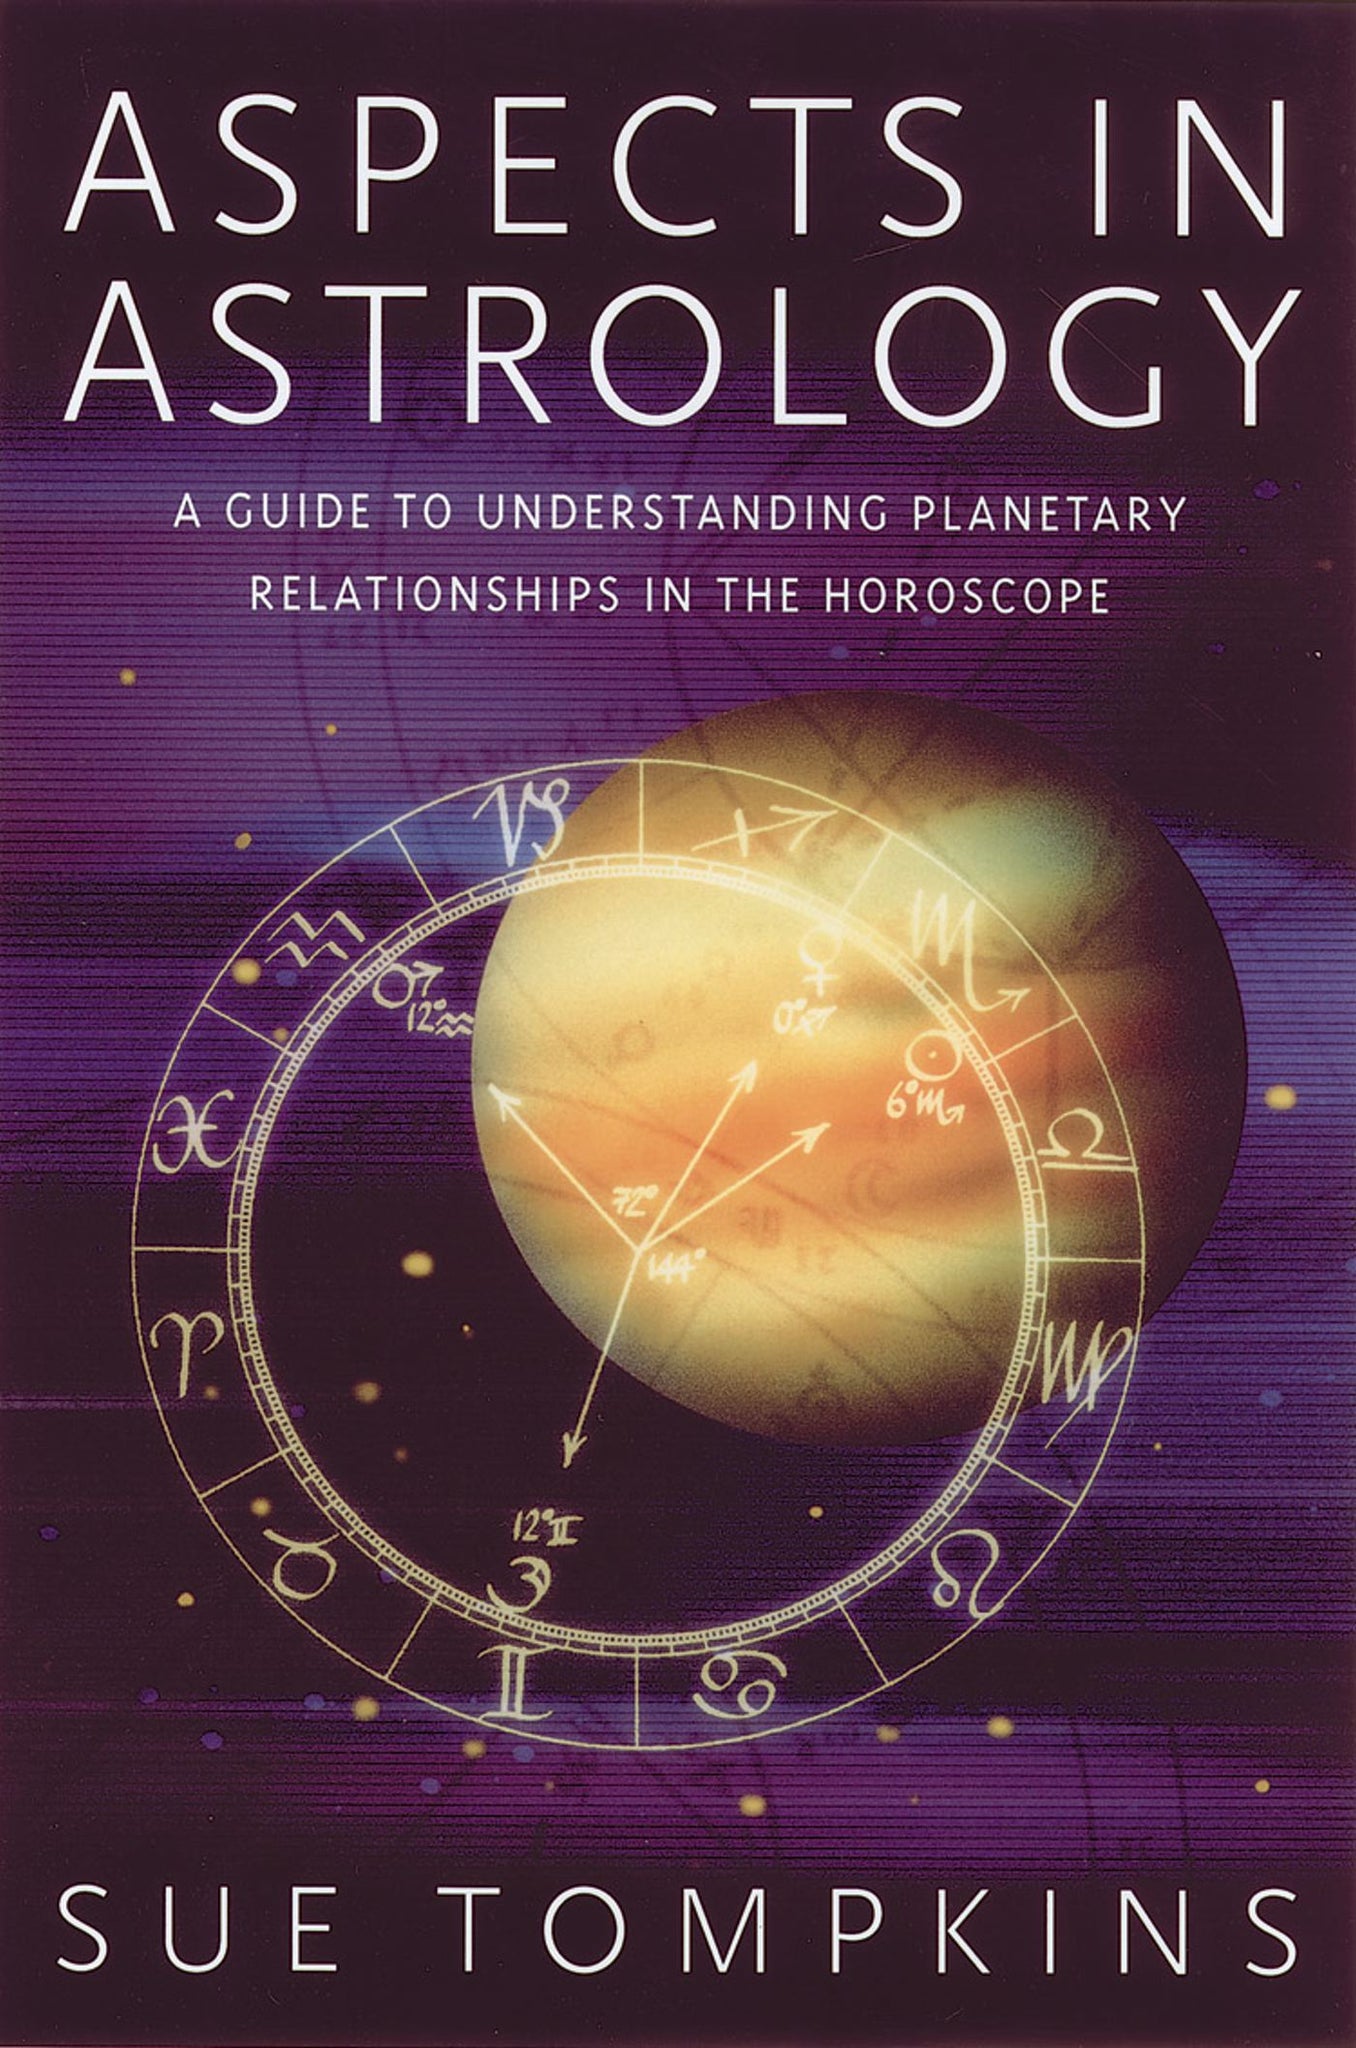 Aspects in Astrology : A Guide to Understanding Planetary Relationships in the Horoscope